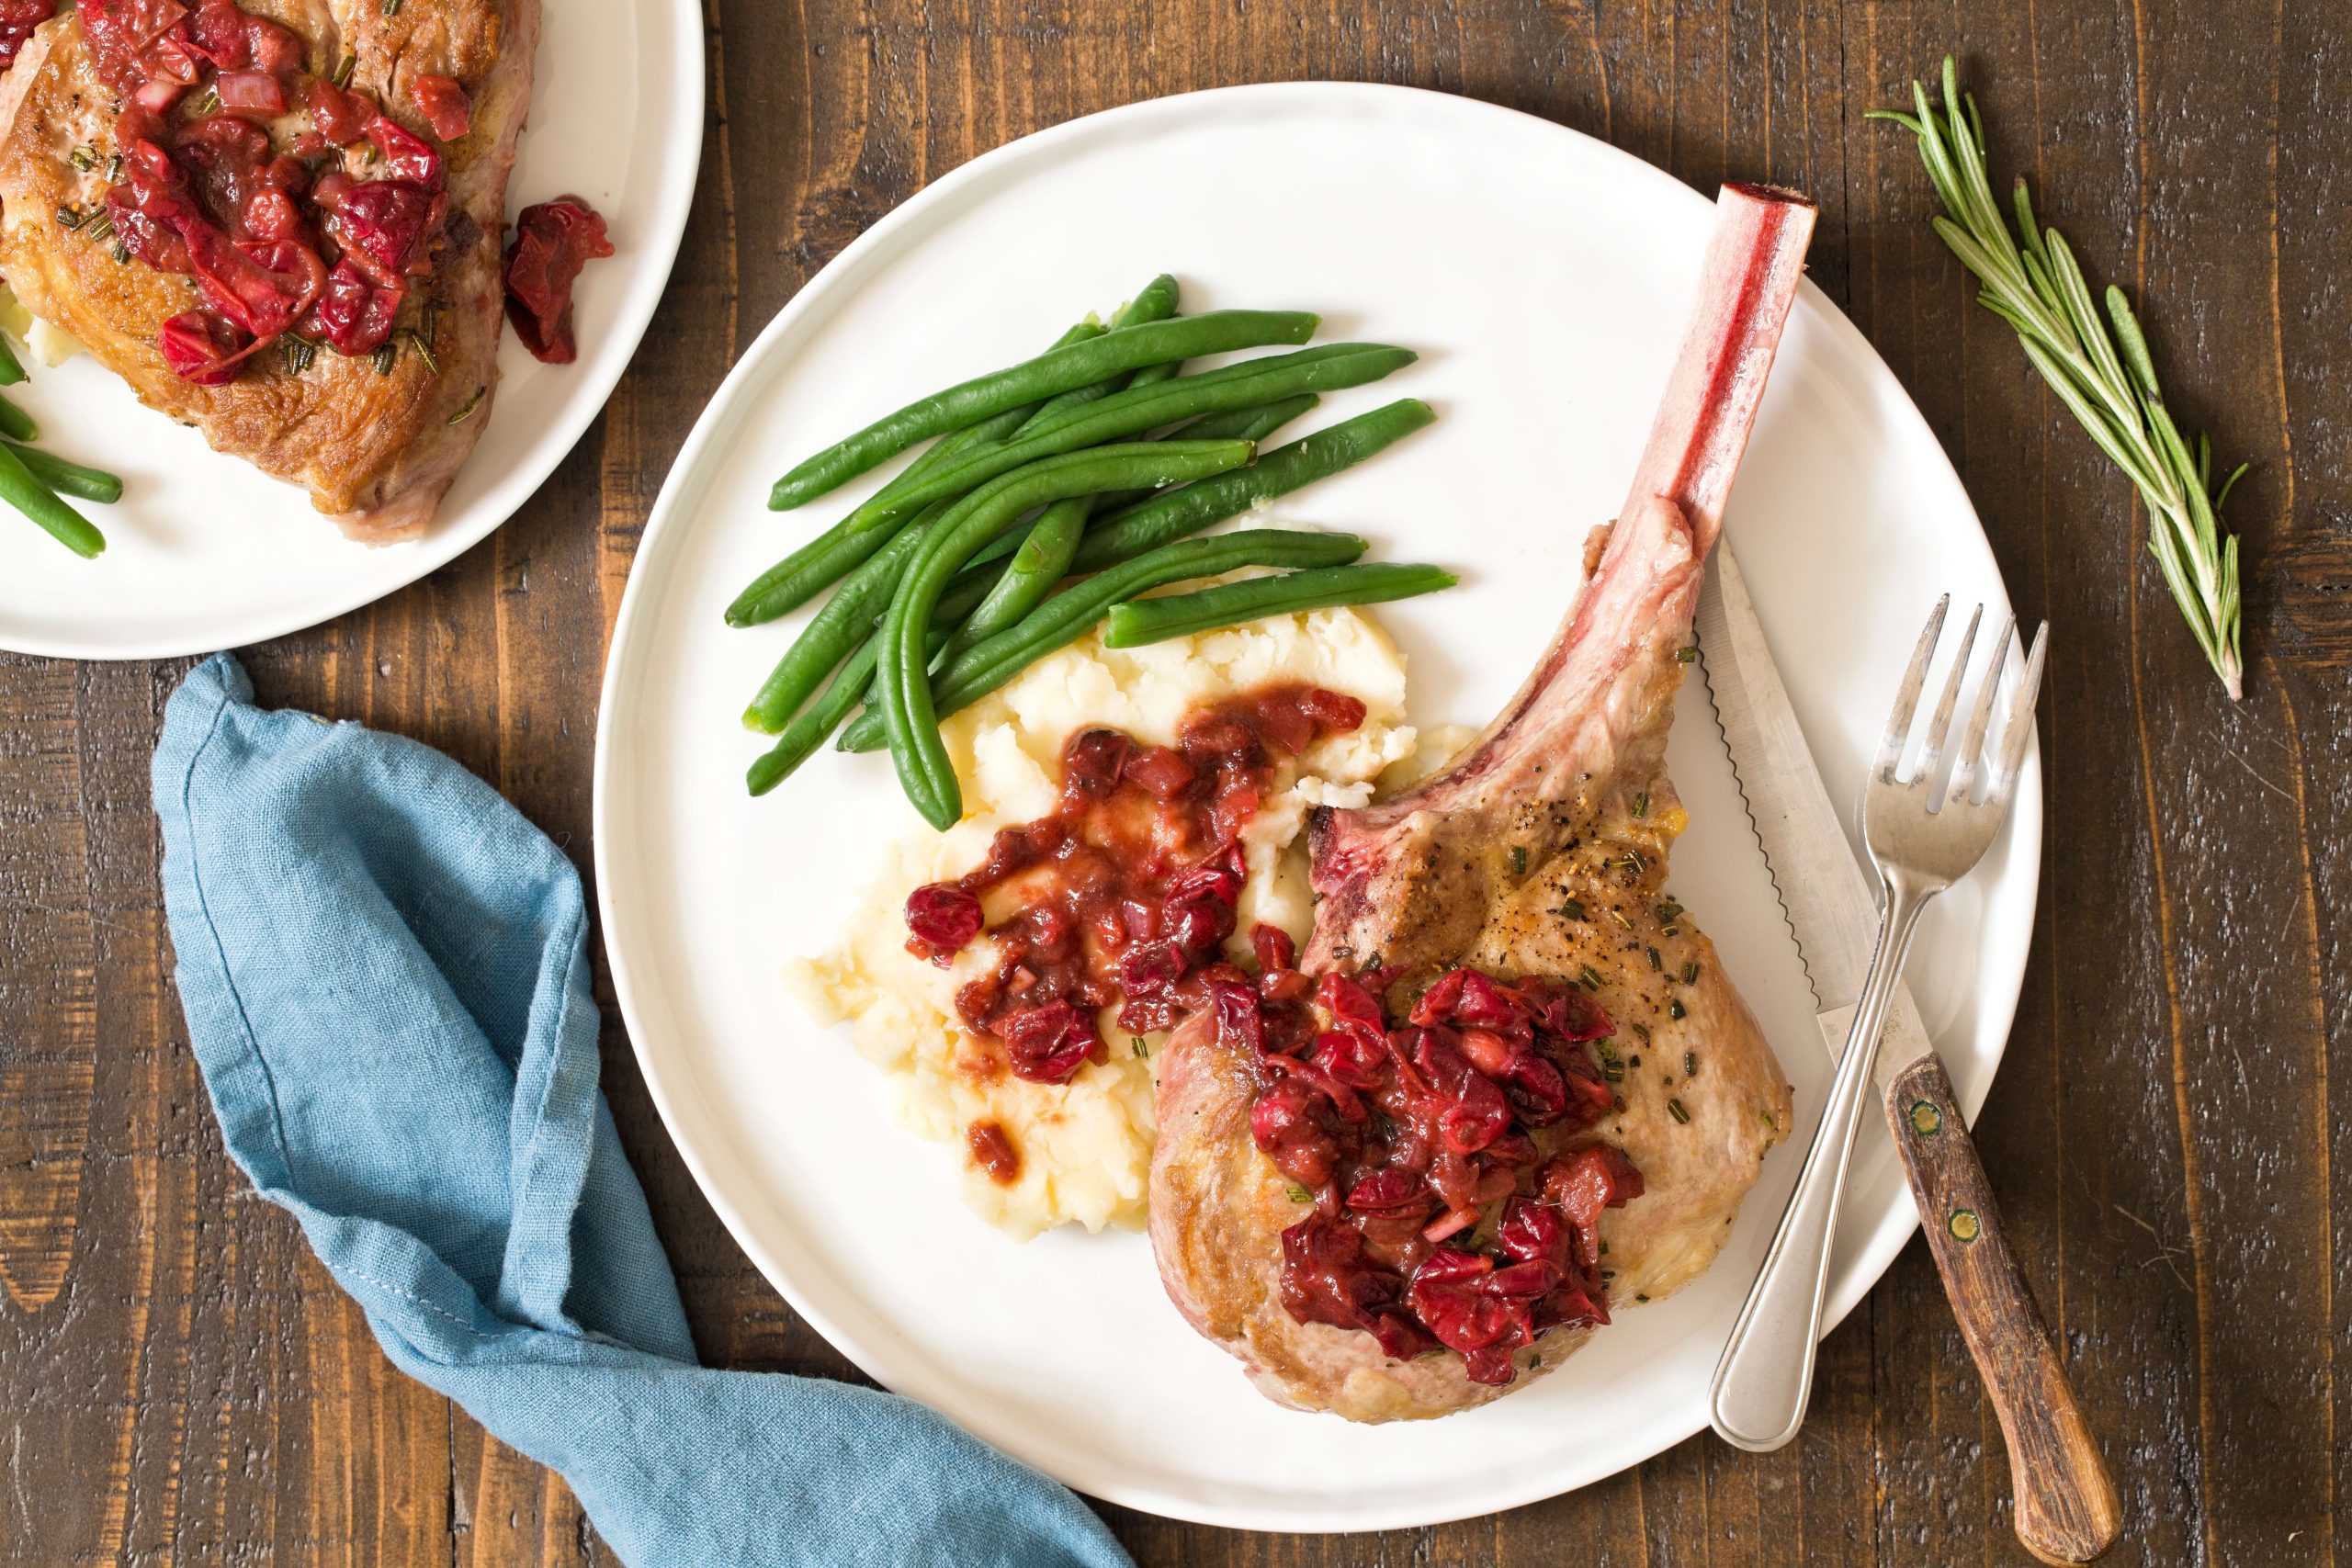 Cranberry Balsamic Veal Chops